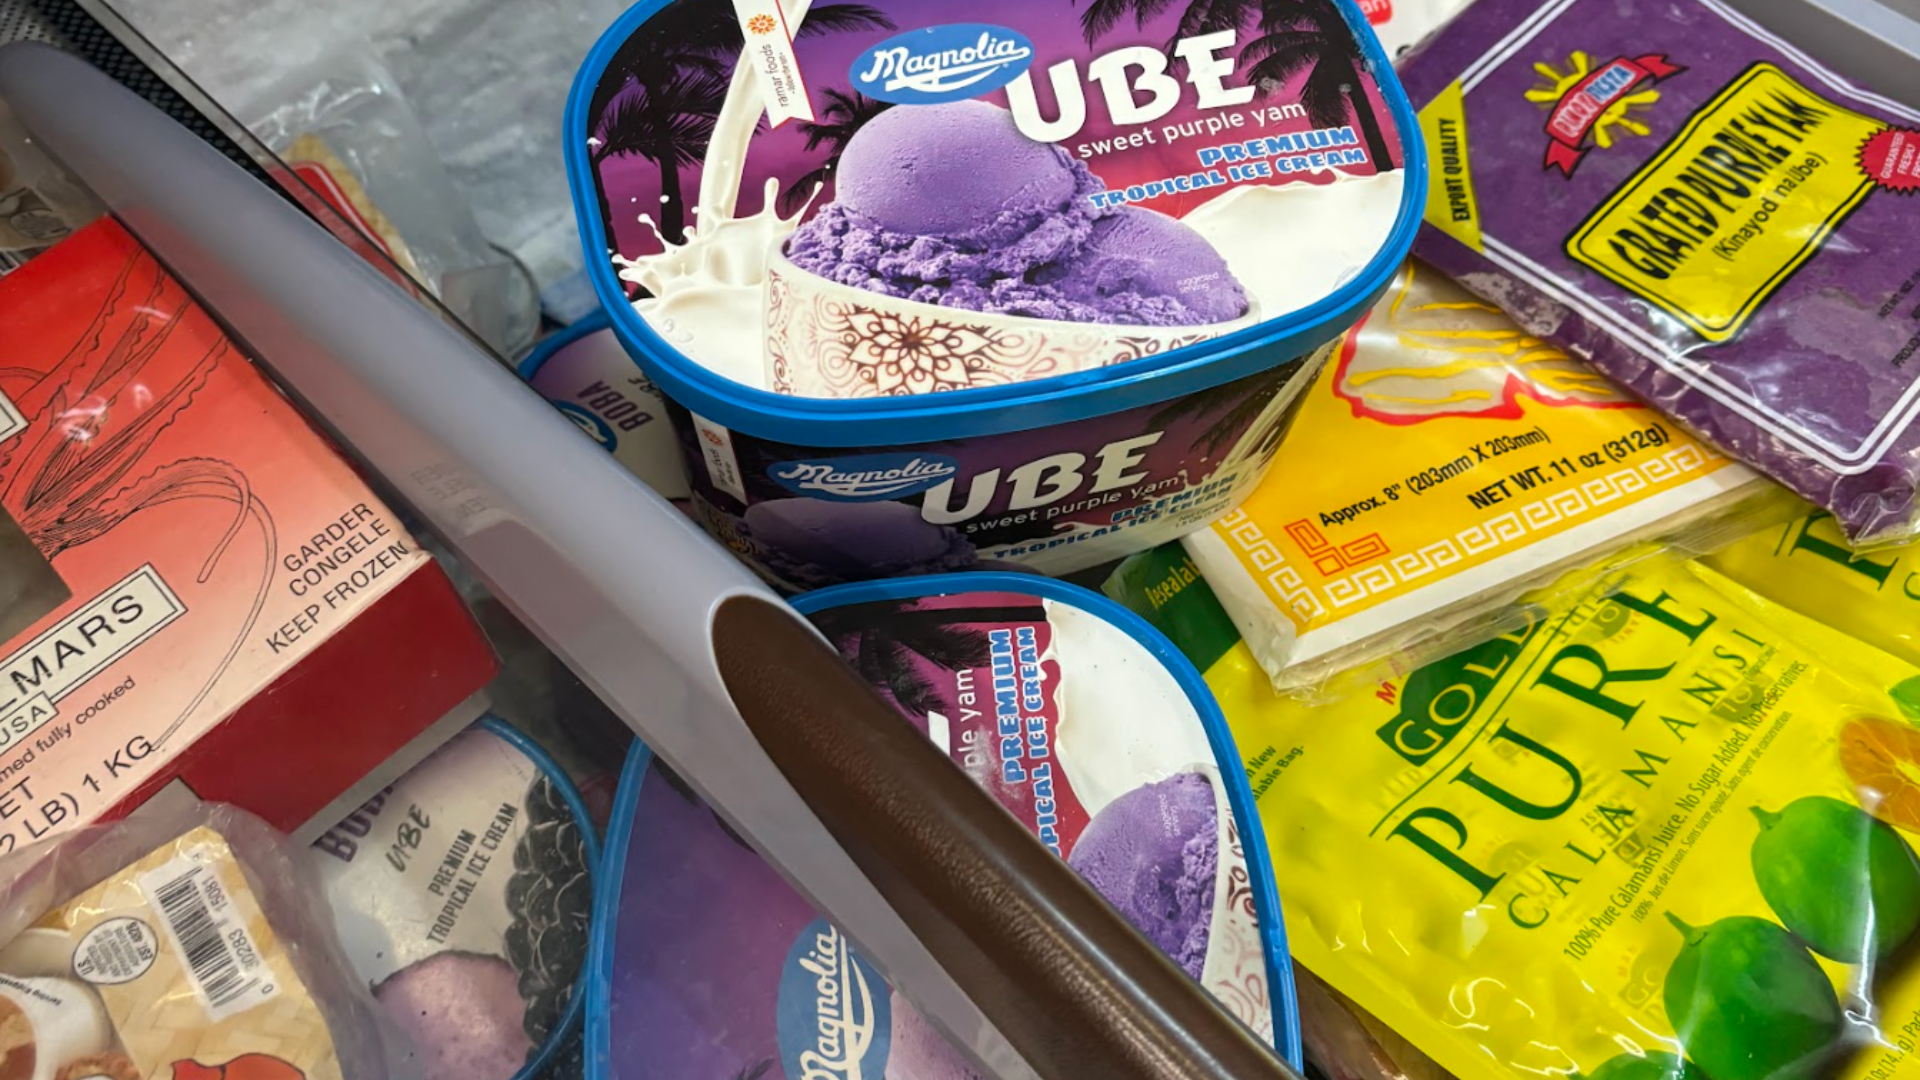 detail of an ice cream freezer with frozen ube and calamansi products